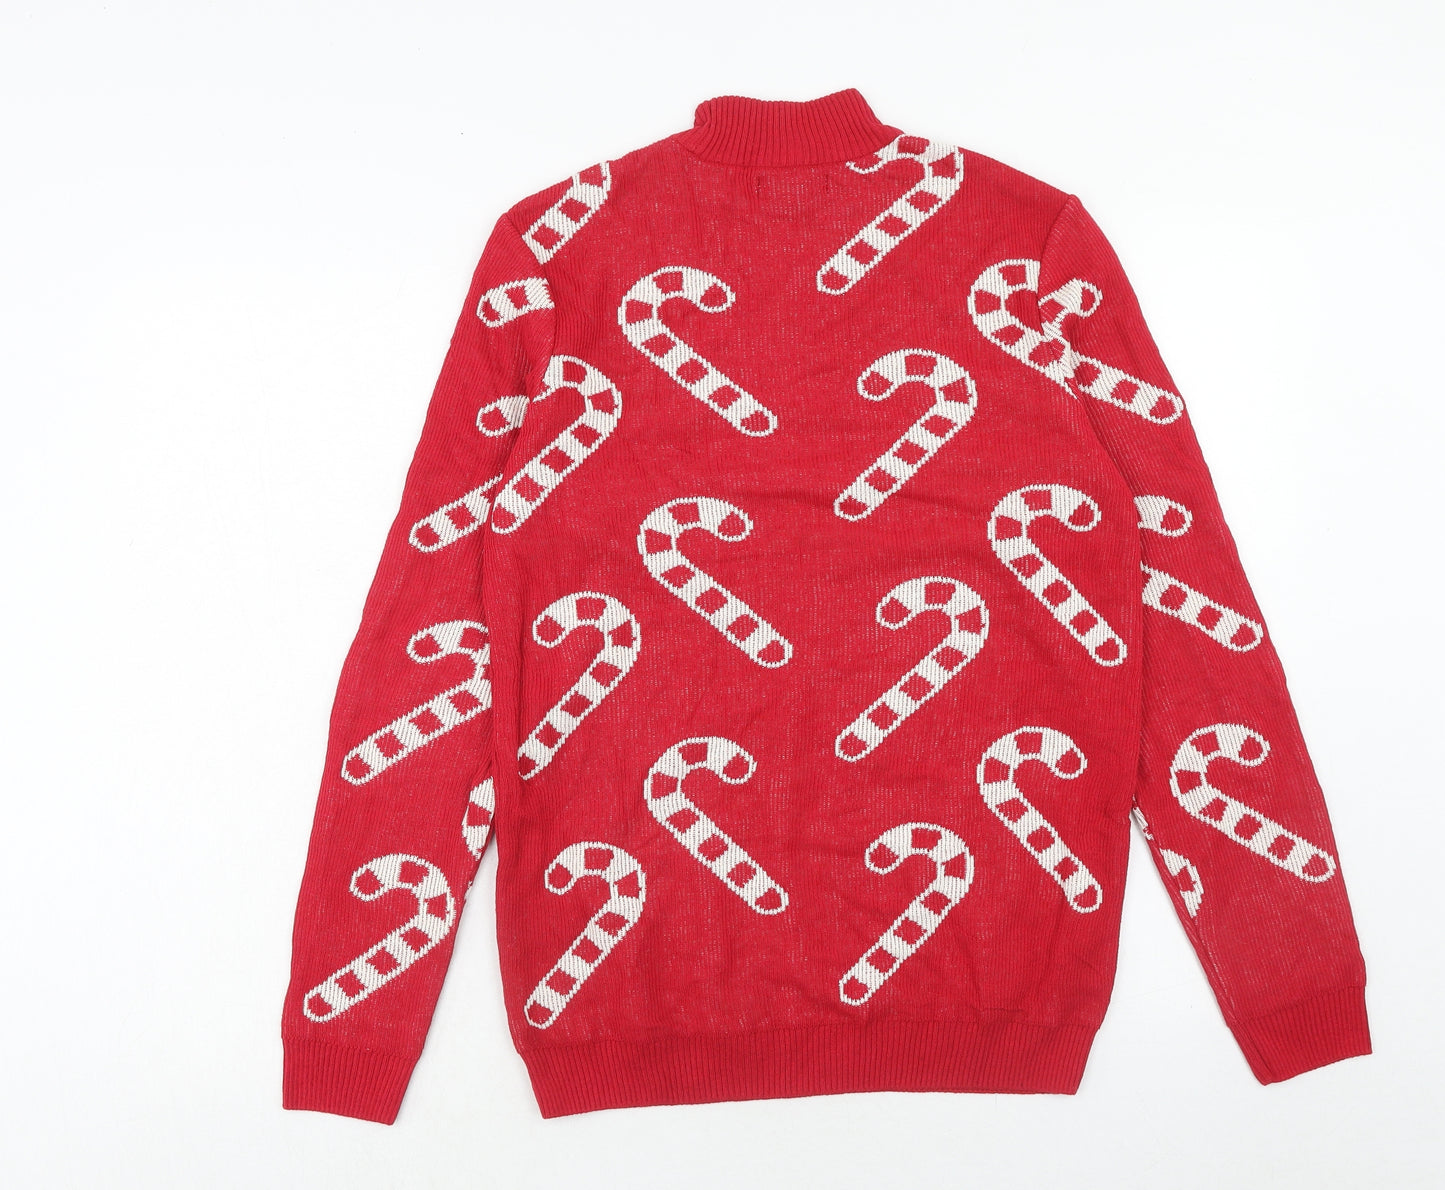 ASOS Mens Red Mock Neck Geometric Cotton Pullover Jumper Size S Long Sleeve - Christmas Candy Cane